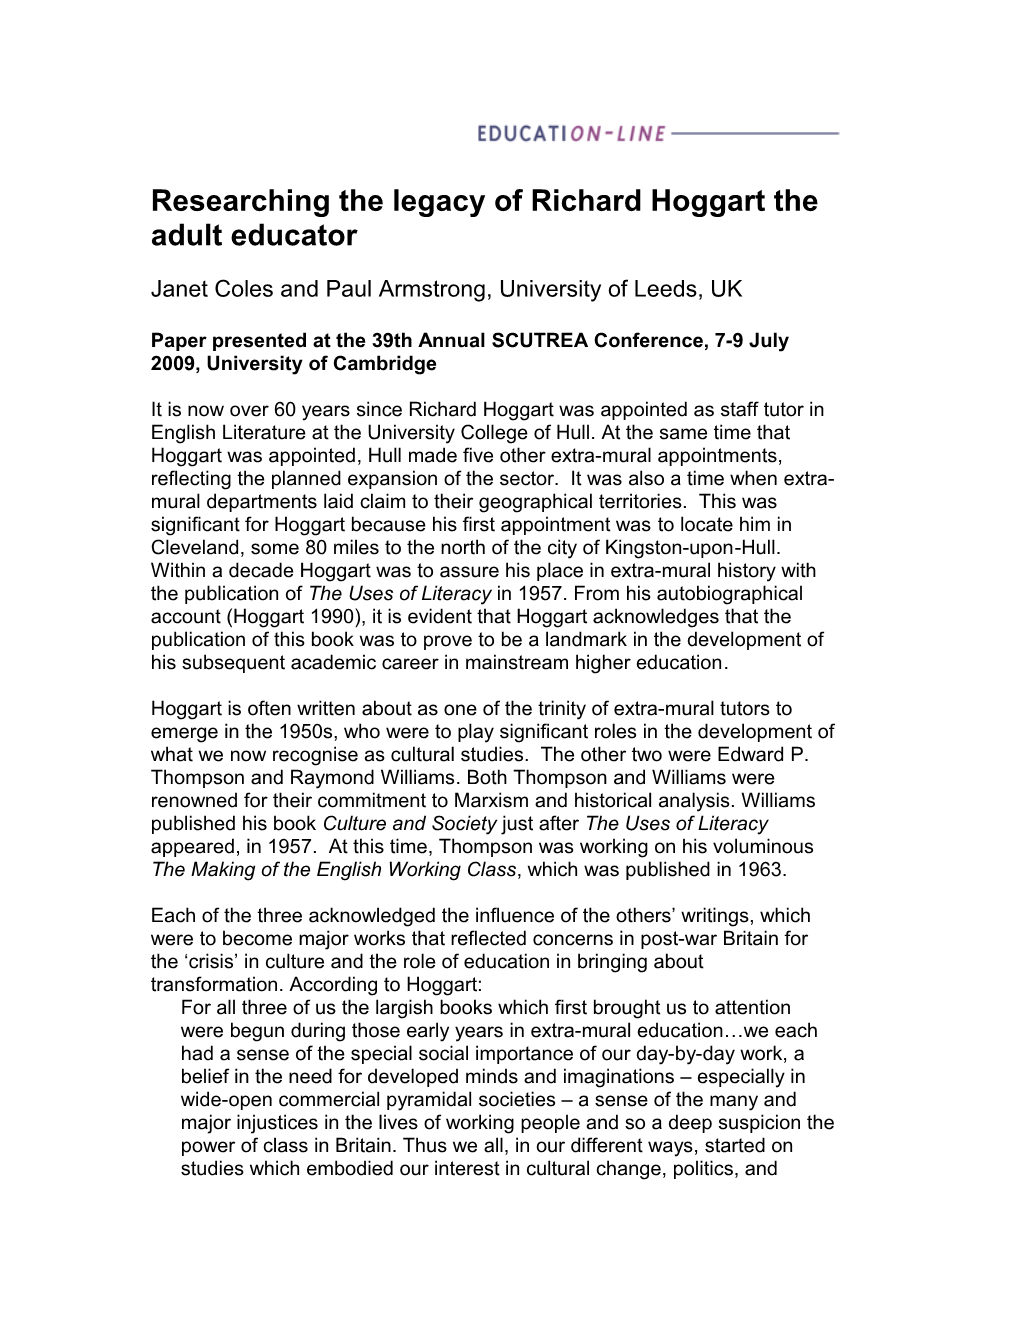 Researching the Legacy of Richard Hoggart the Adult Educator